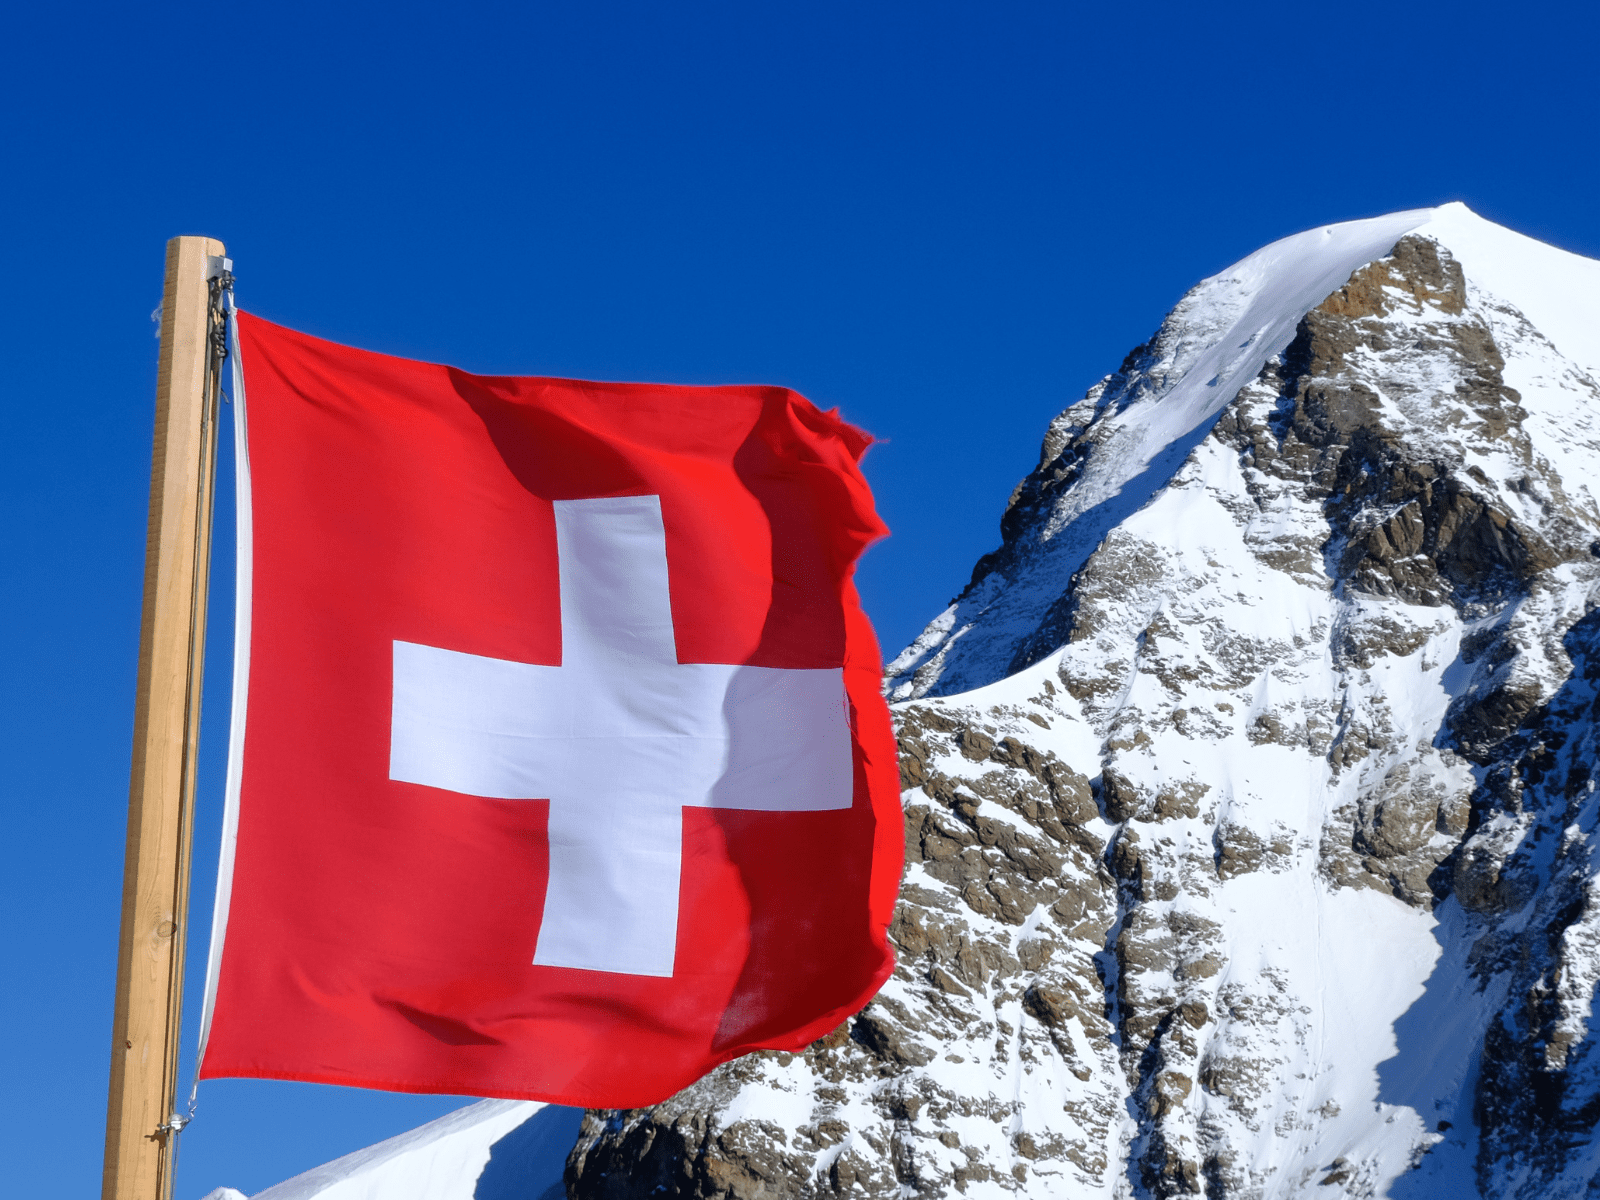 Red and White Travel to Swiss Instagram Post 1600 × 1200 px 2